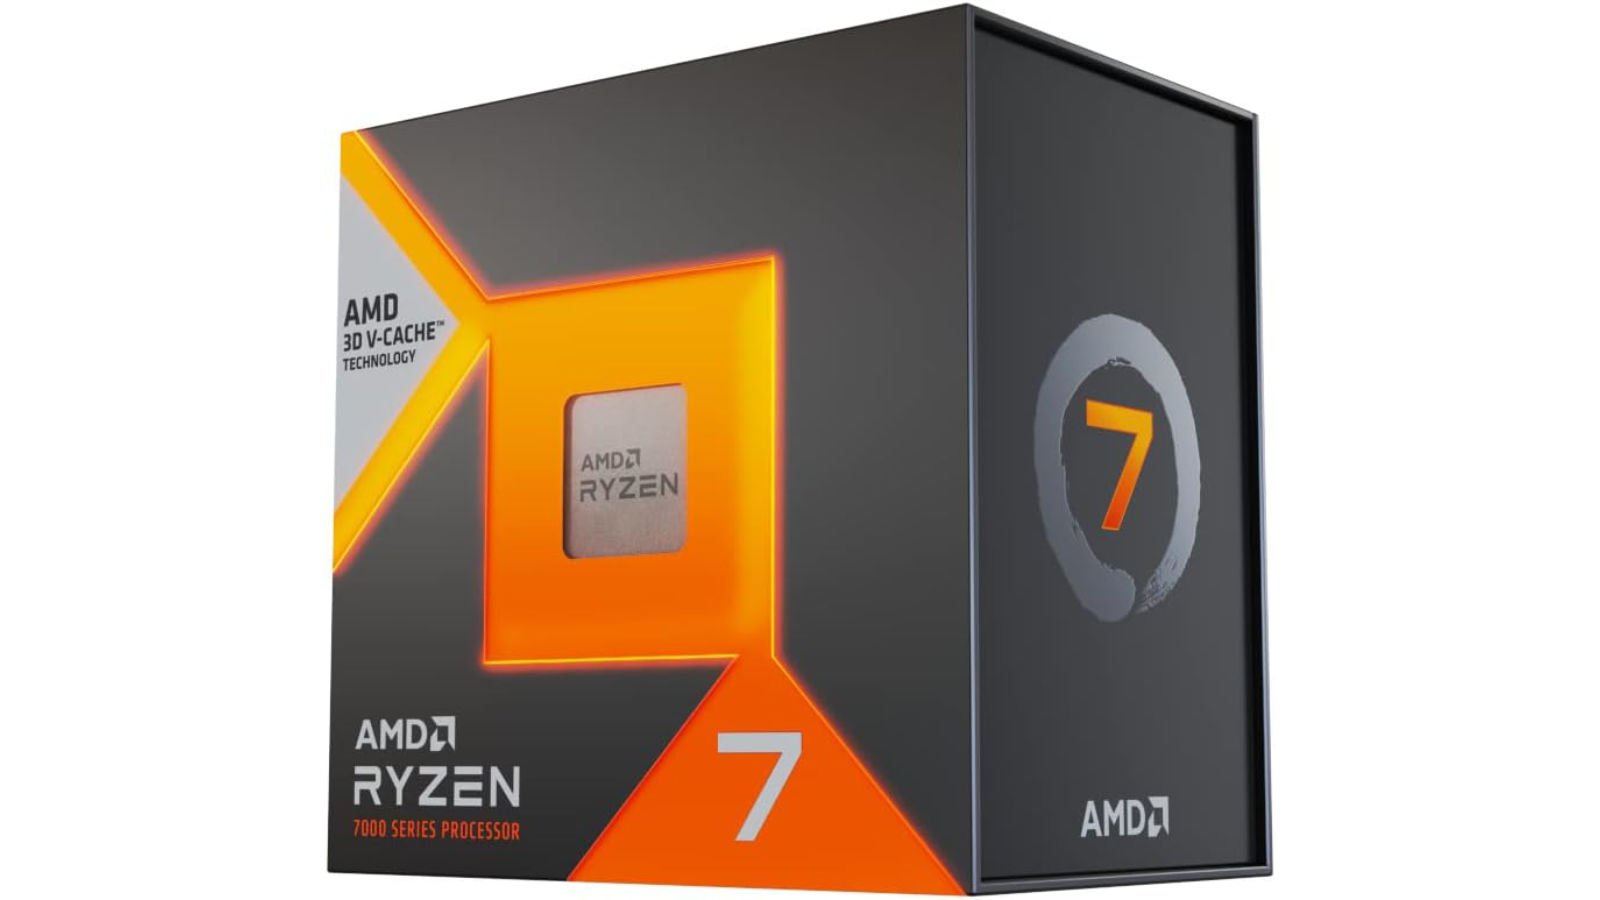 AMD Ryzen 7 7800X3D CPU product image against a white background.